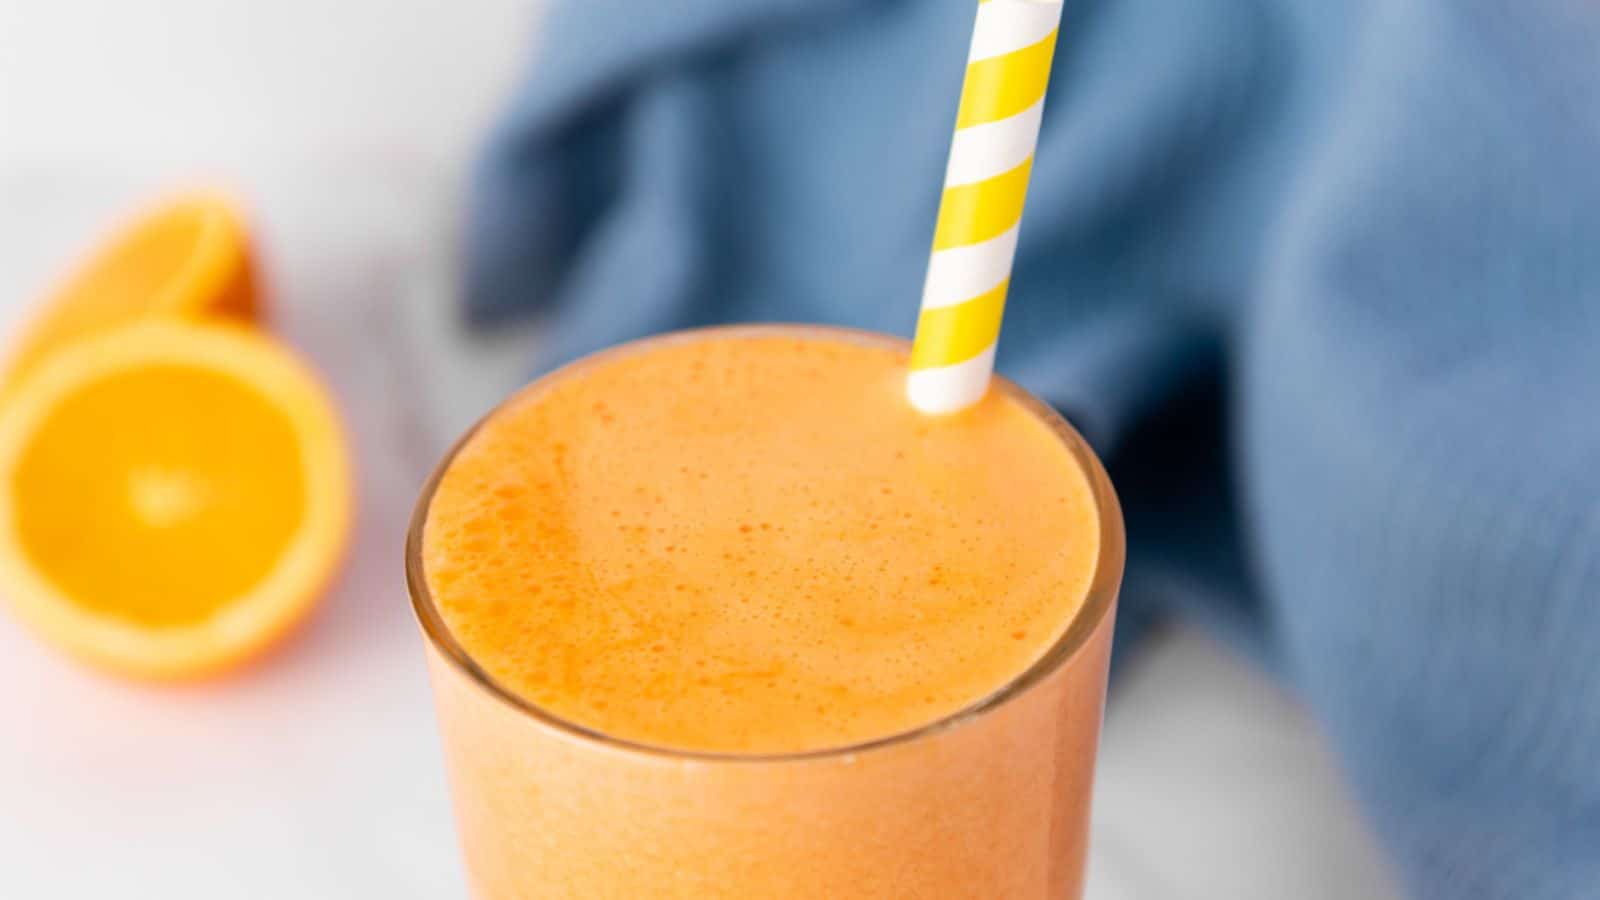 An orange smoothie with a striped straw.